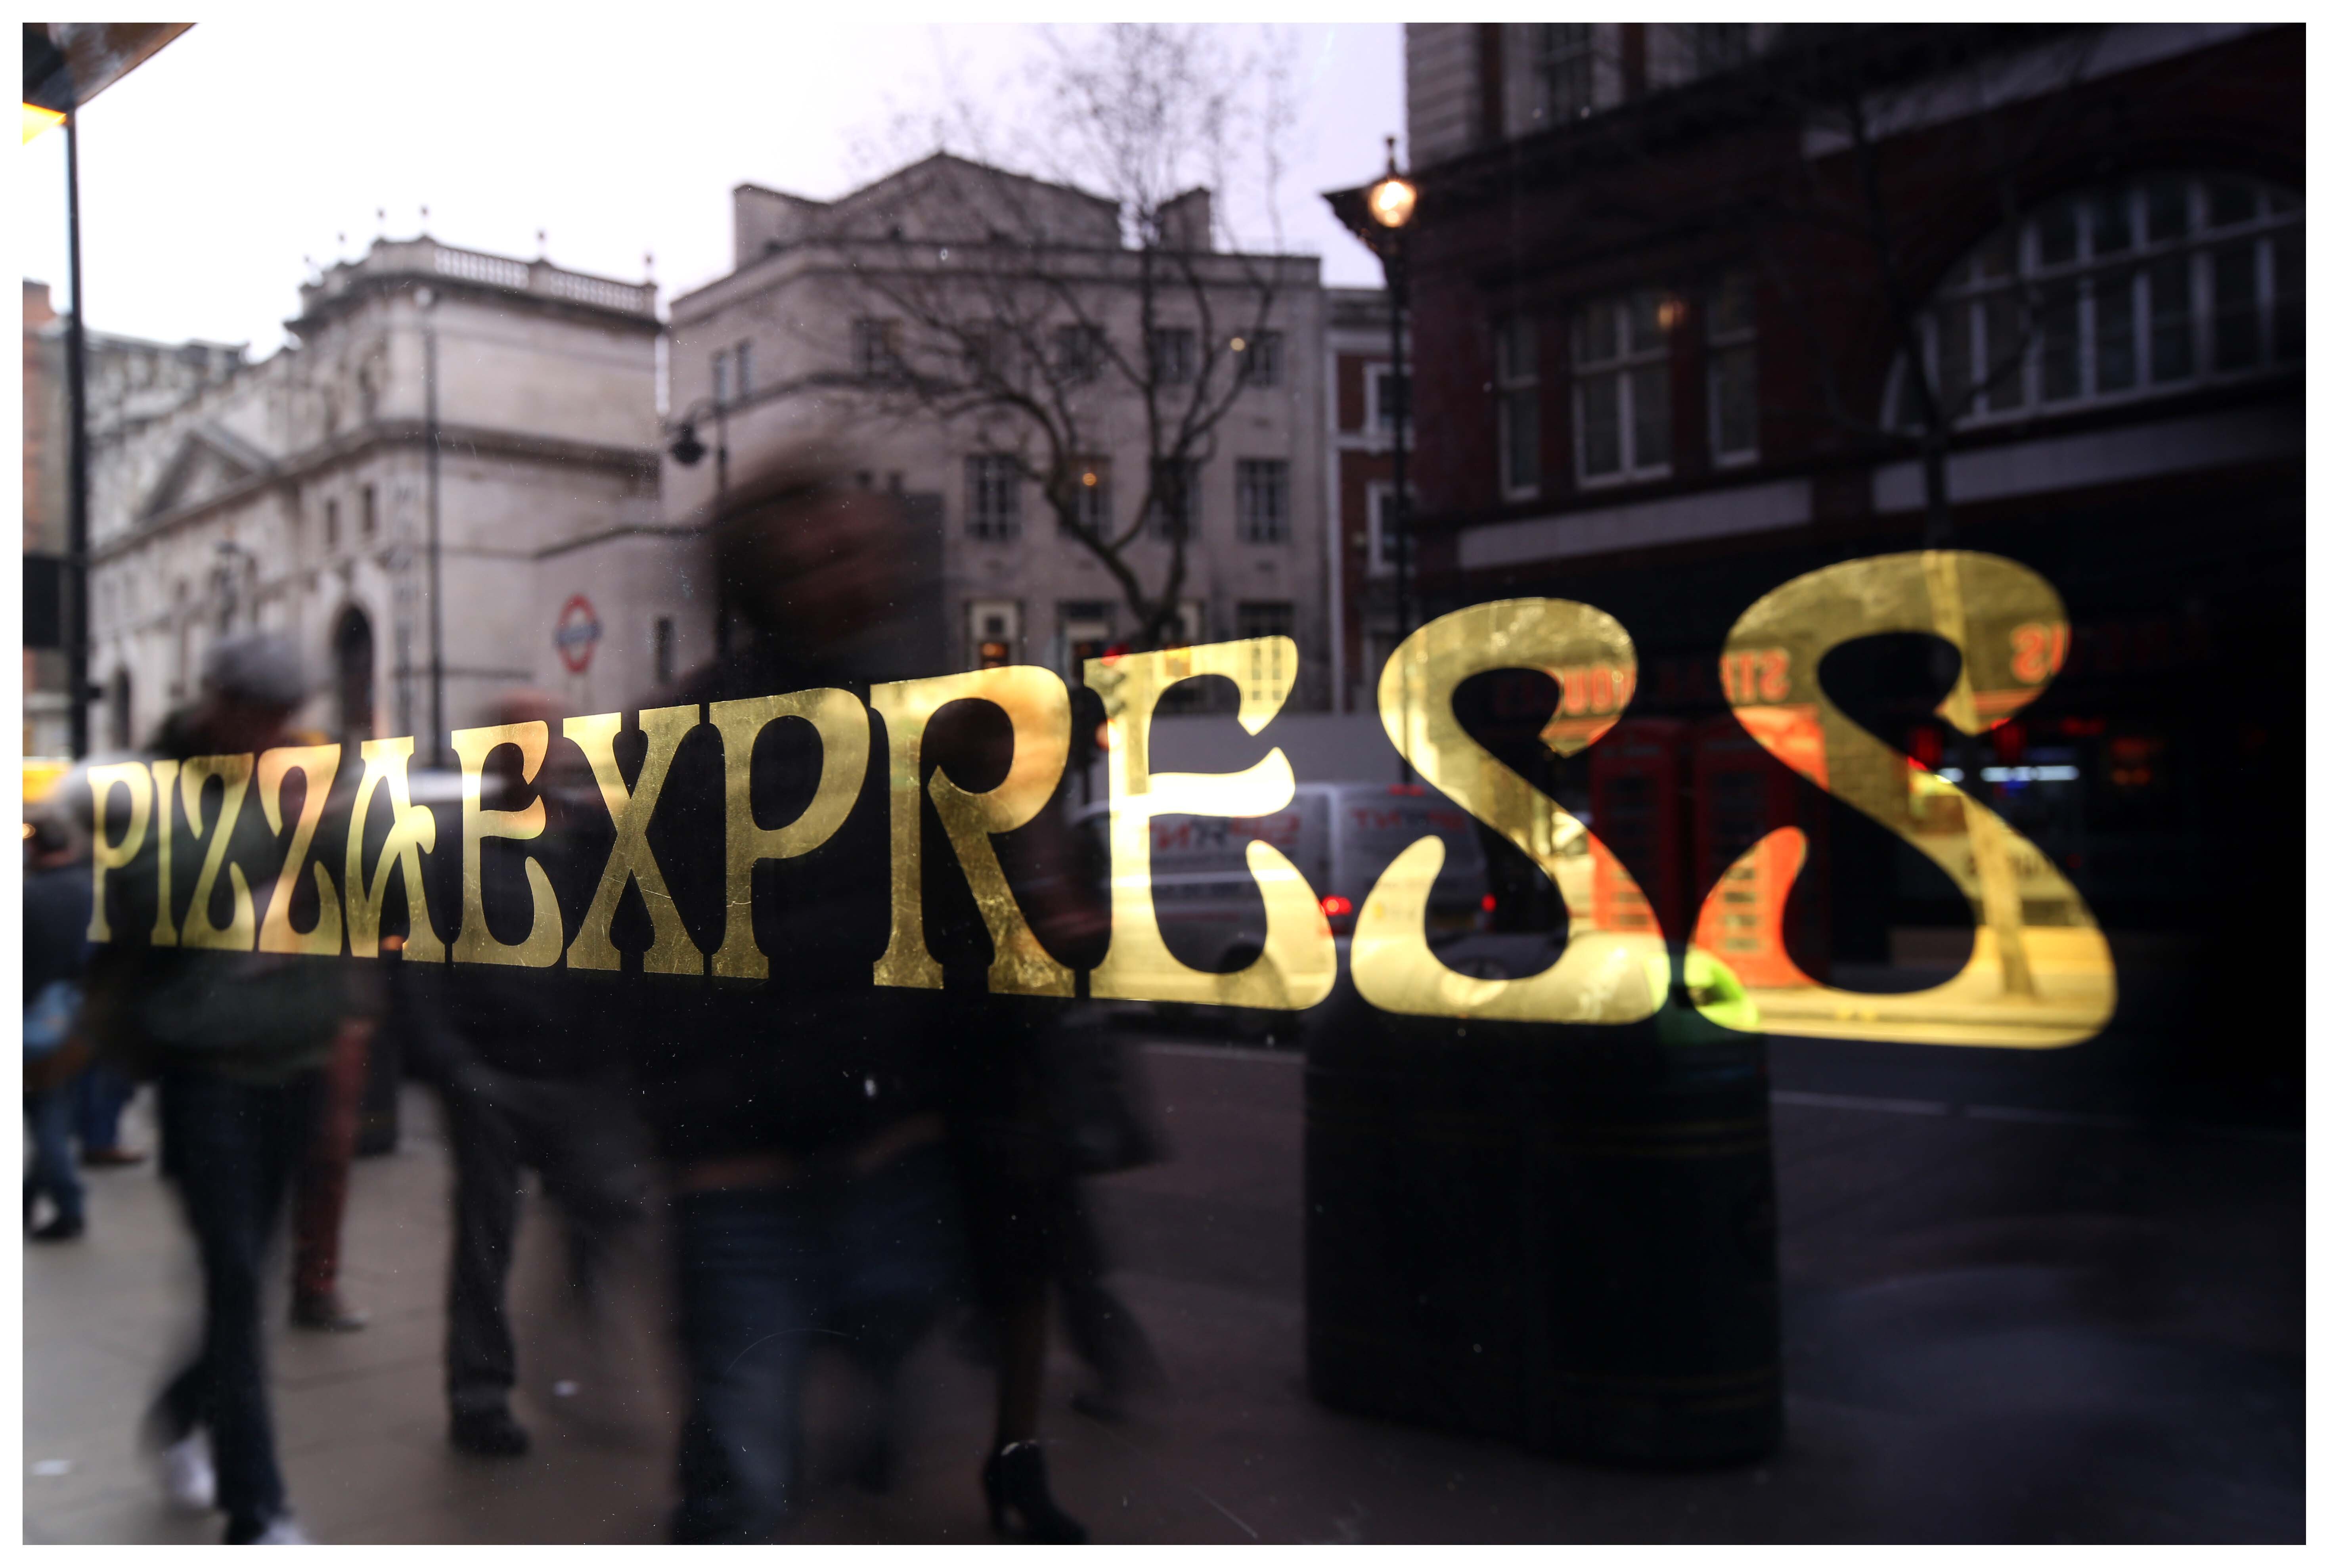 Lenders set to take over PizzaExpress and restructure business